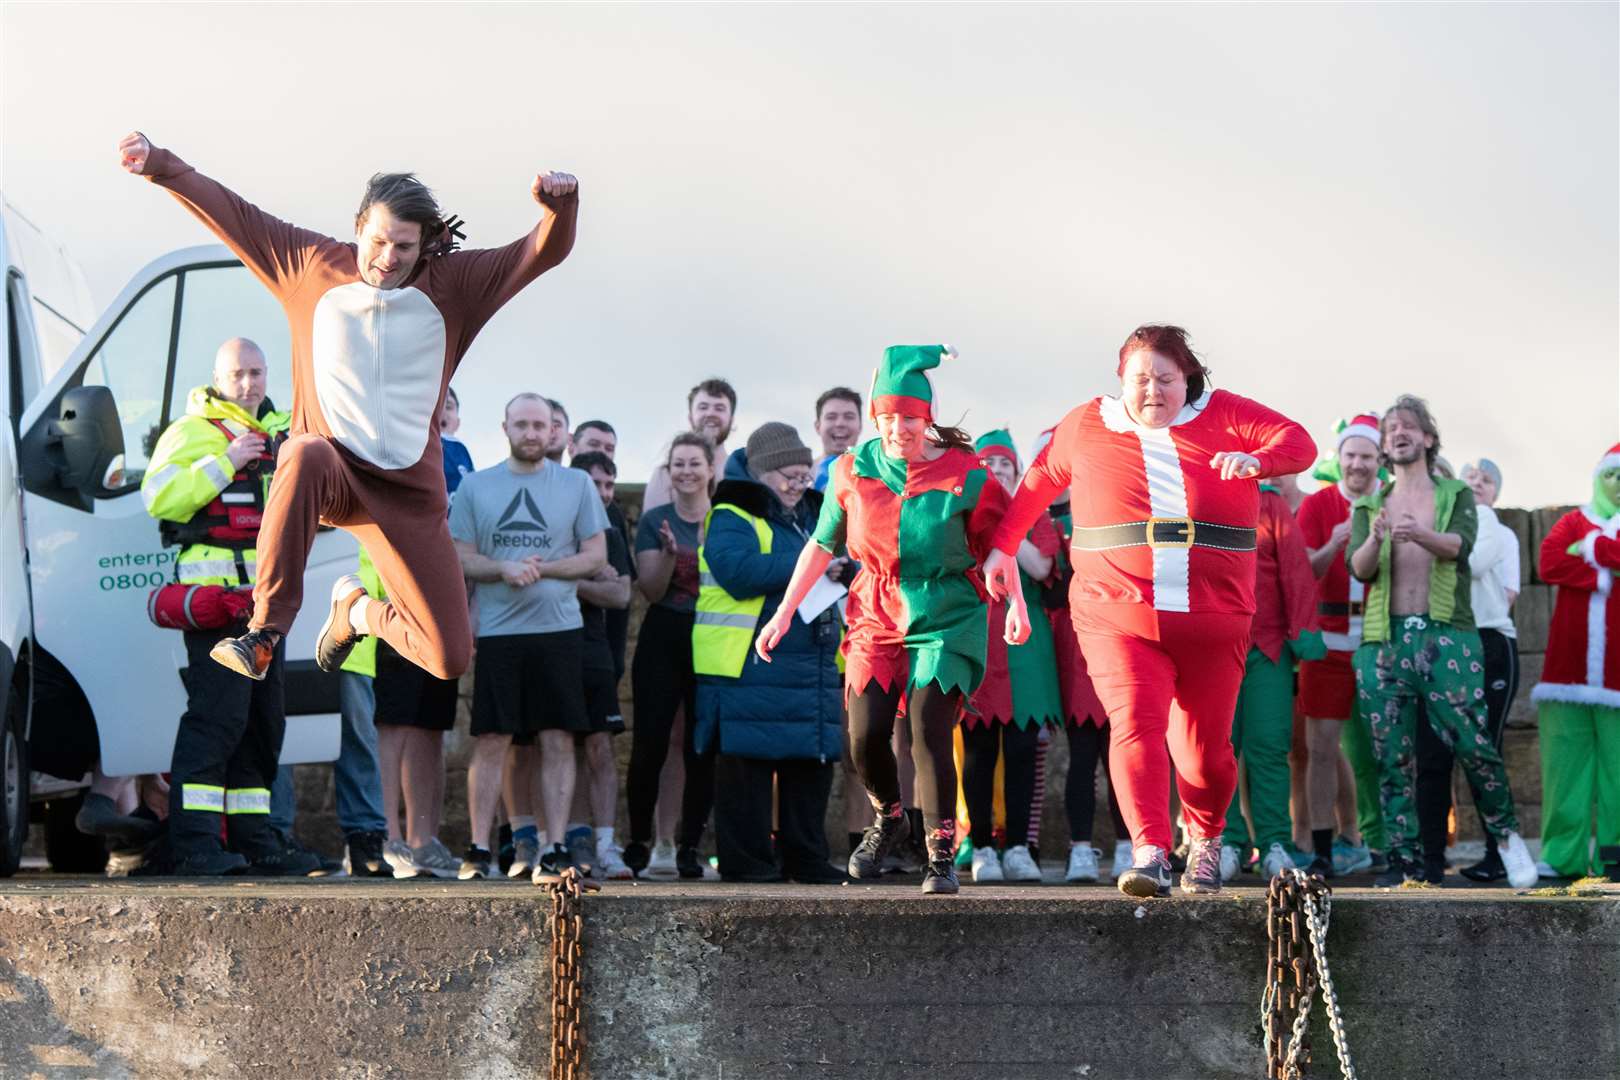 Fancy dress was the order of the day for many at the Burghead Boxing Day Swim. Picture: Daniel Forsyth